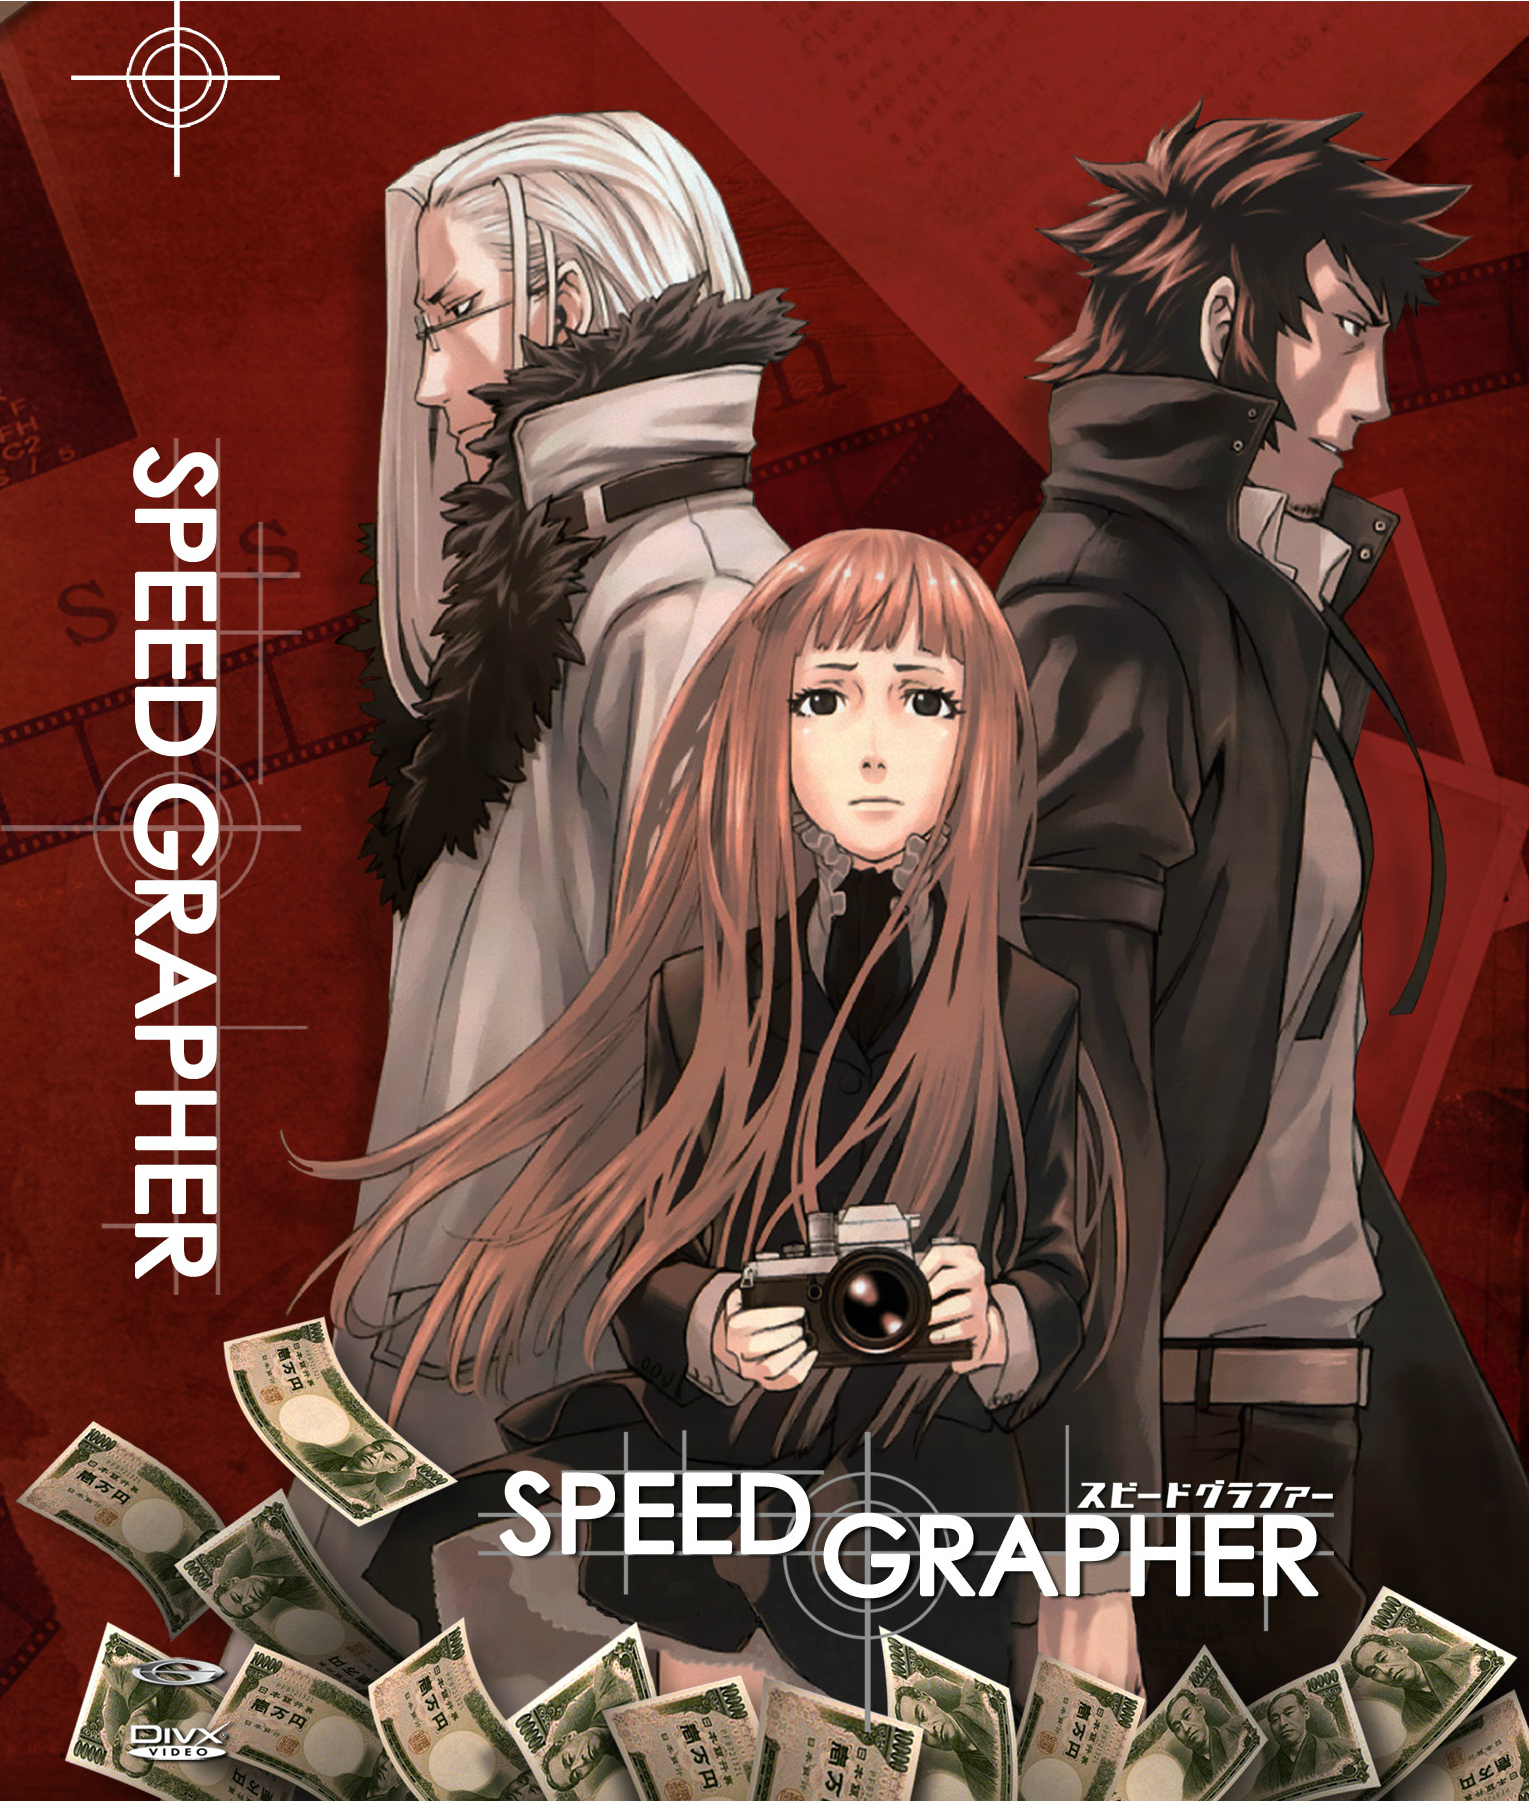 Speed Grapher Pics, Anime Collection